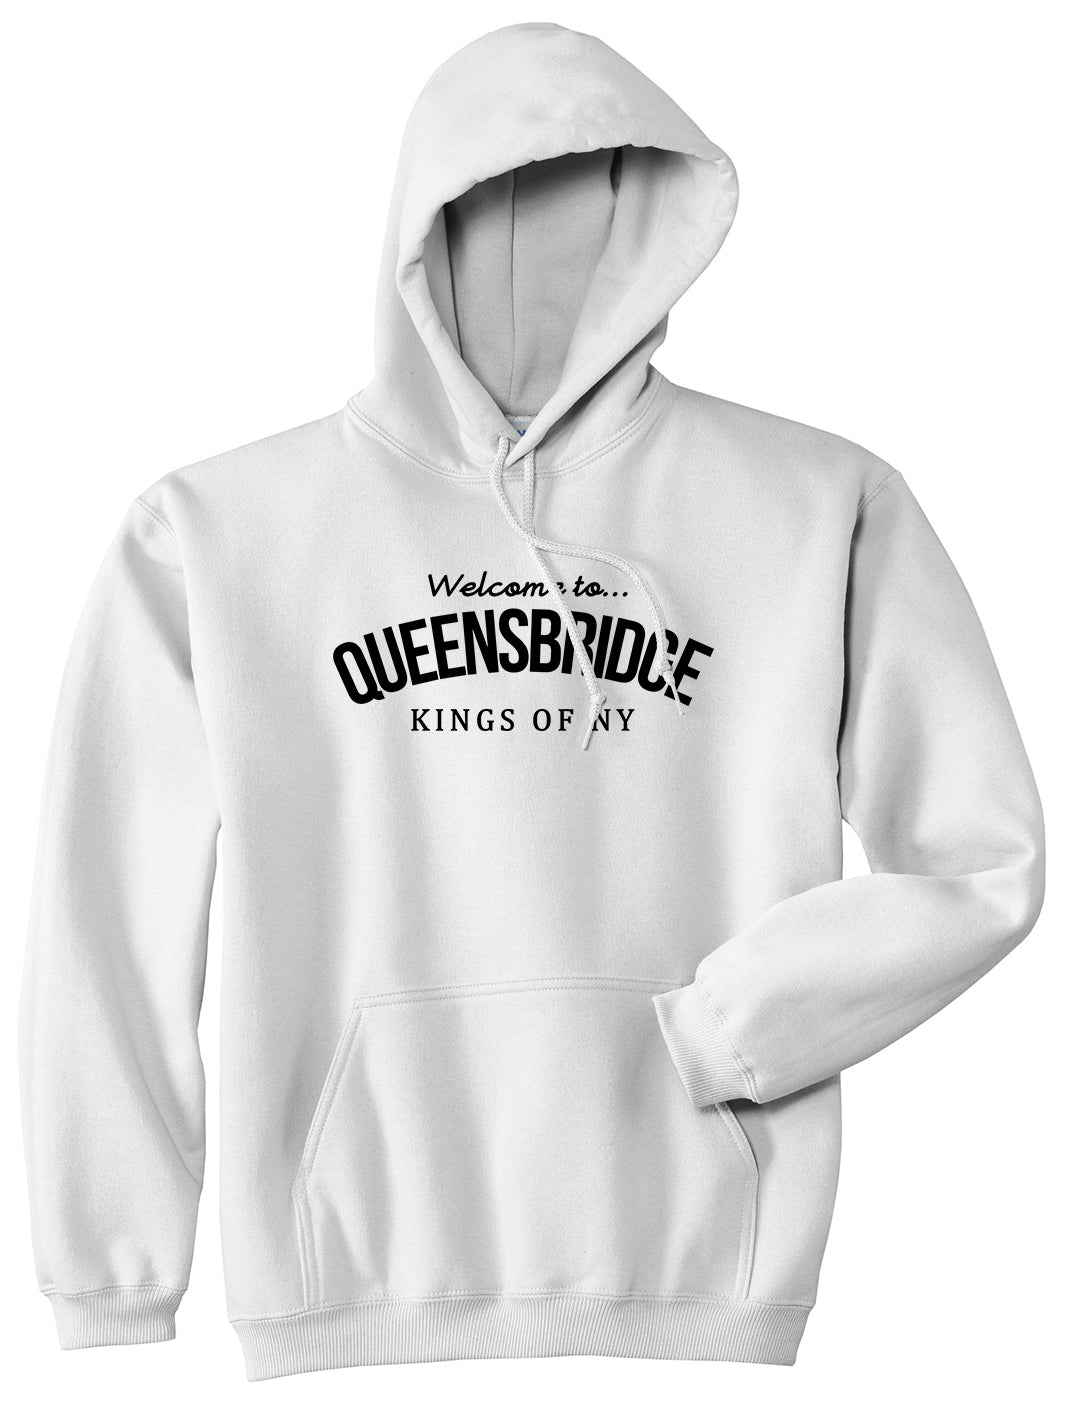 Welcome To Queensbridge Mens Pullover Hoodie White by Kings Of NY